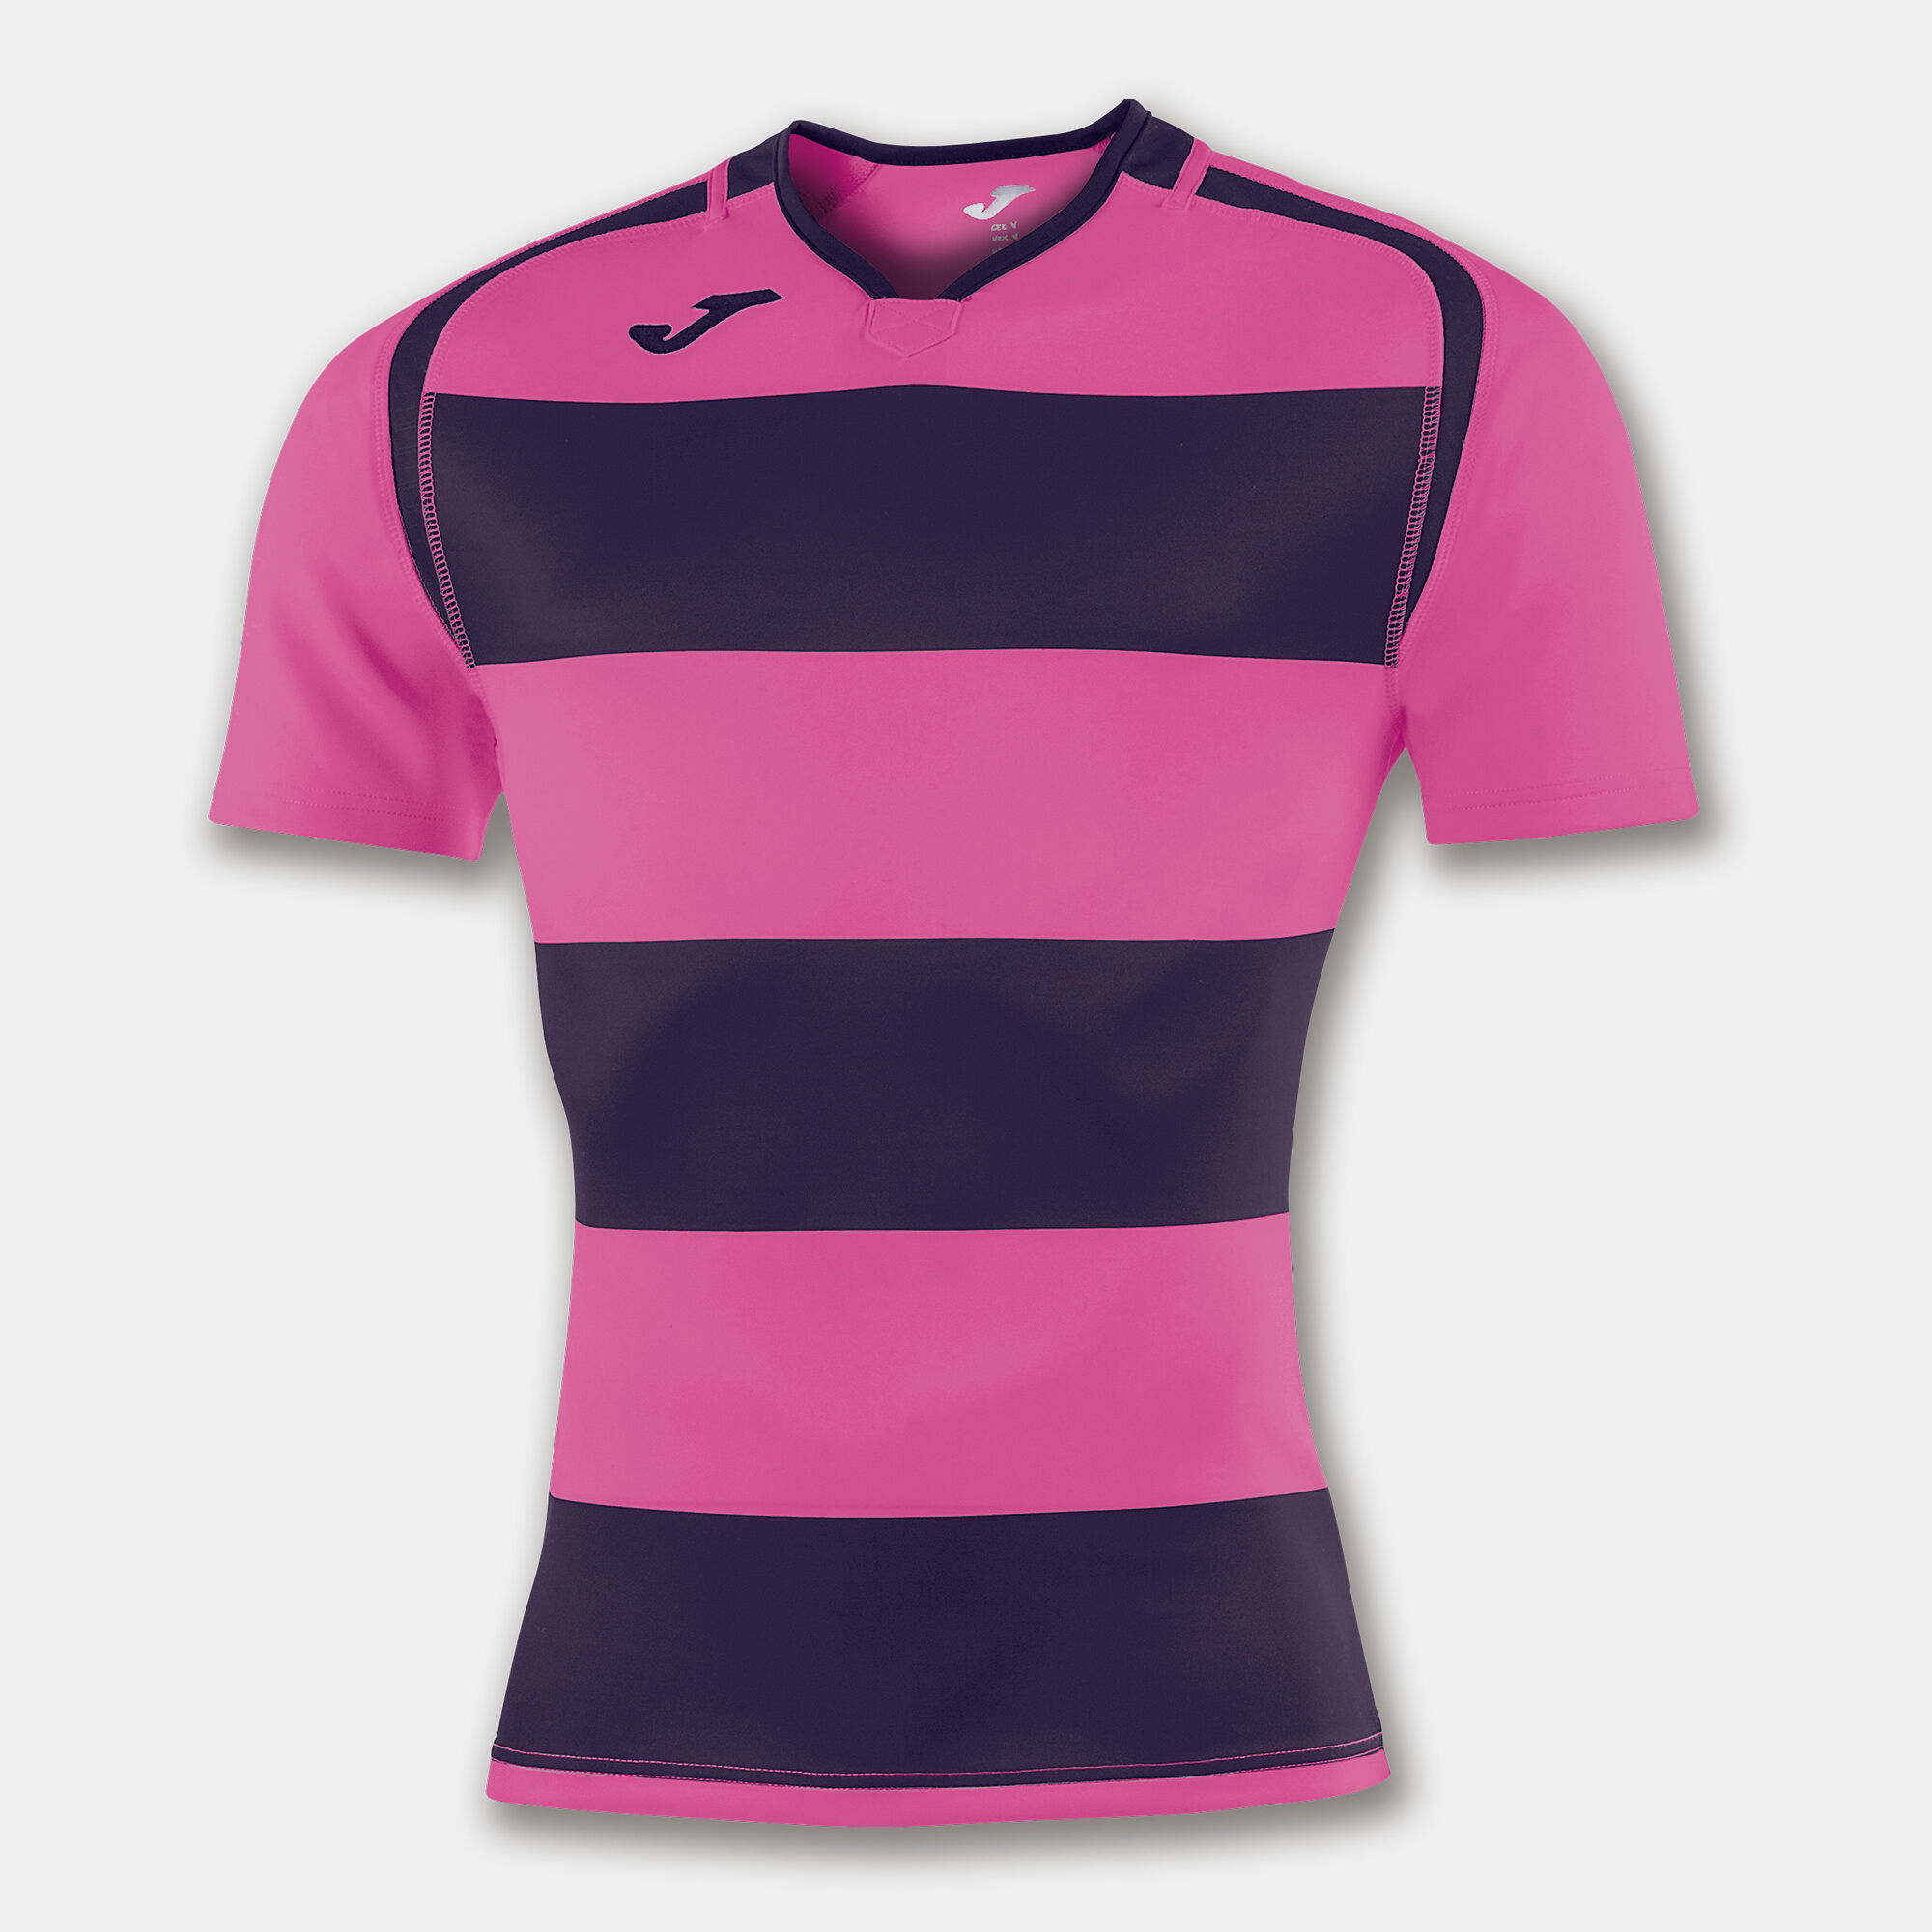 Maillot manches courtes homme Prorugby II violet rose